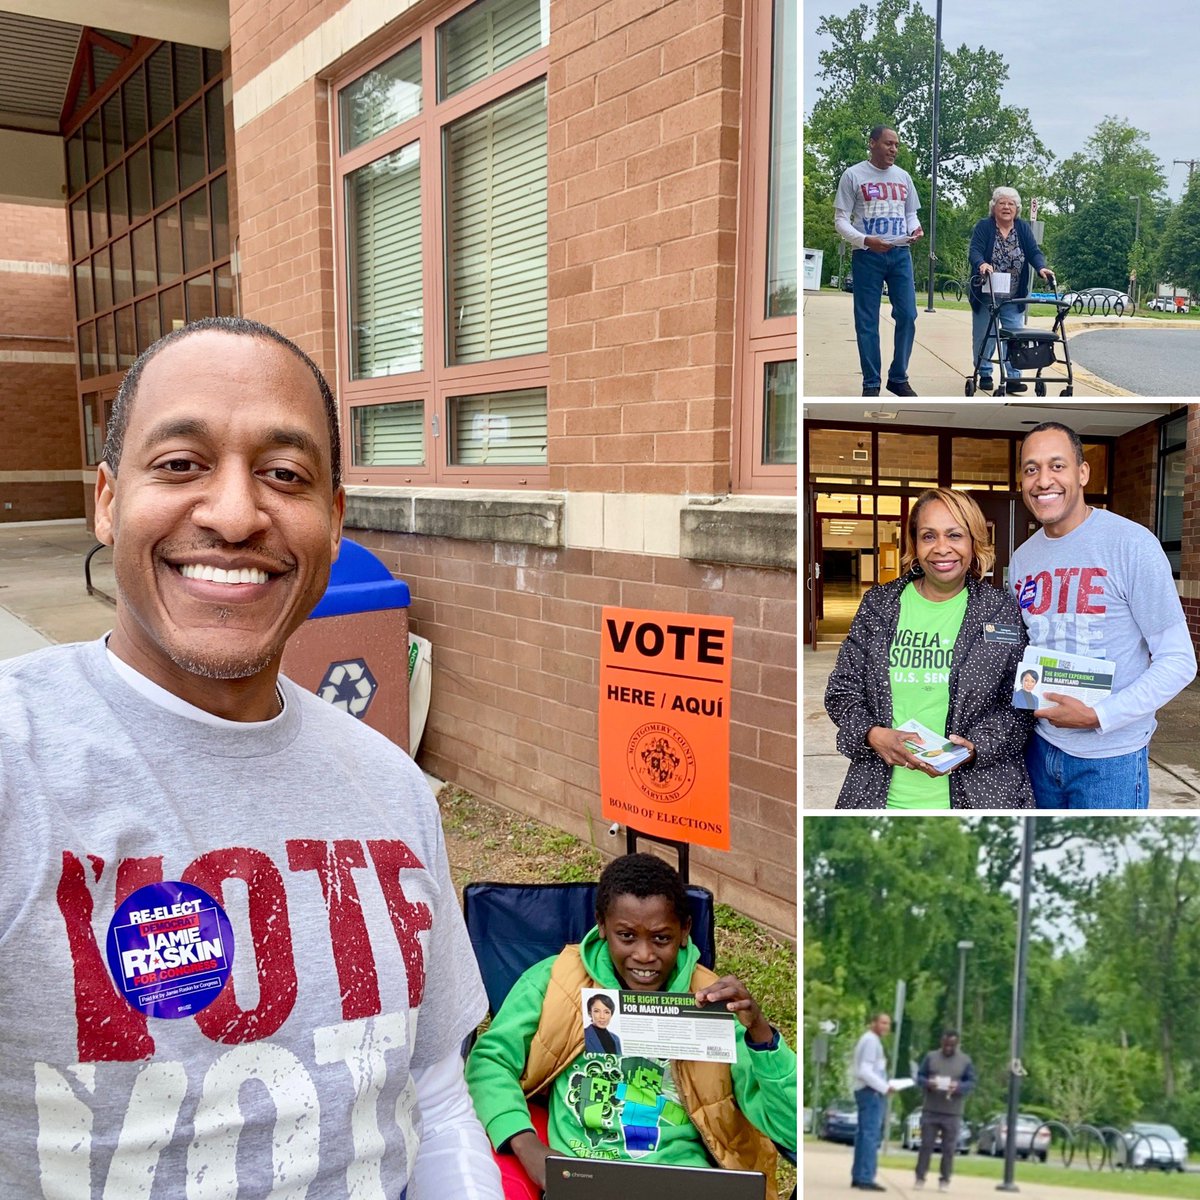 What a day for Maryland’s Primary! The sun was out then the rain came later, but most importantly I enjoyed showing my son what civic engagement is all about. #Voting #DadandSon #District5